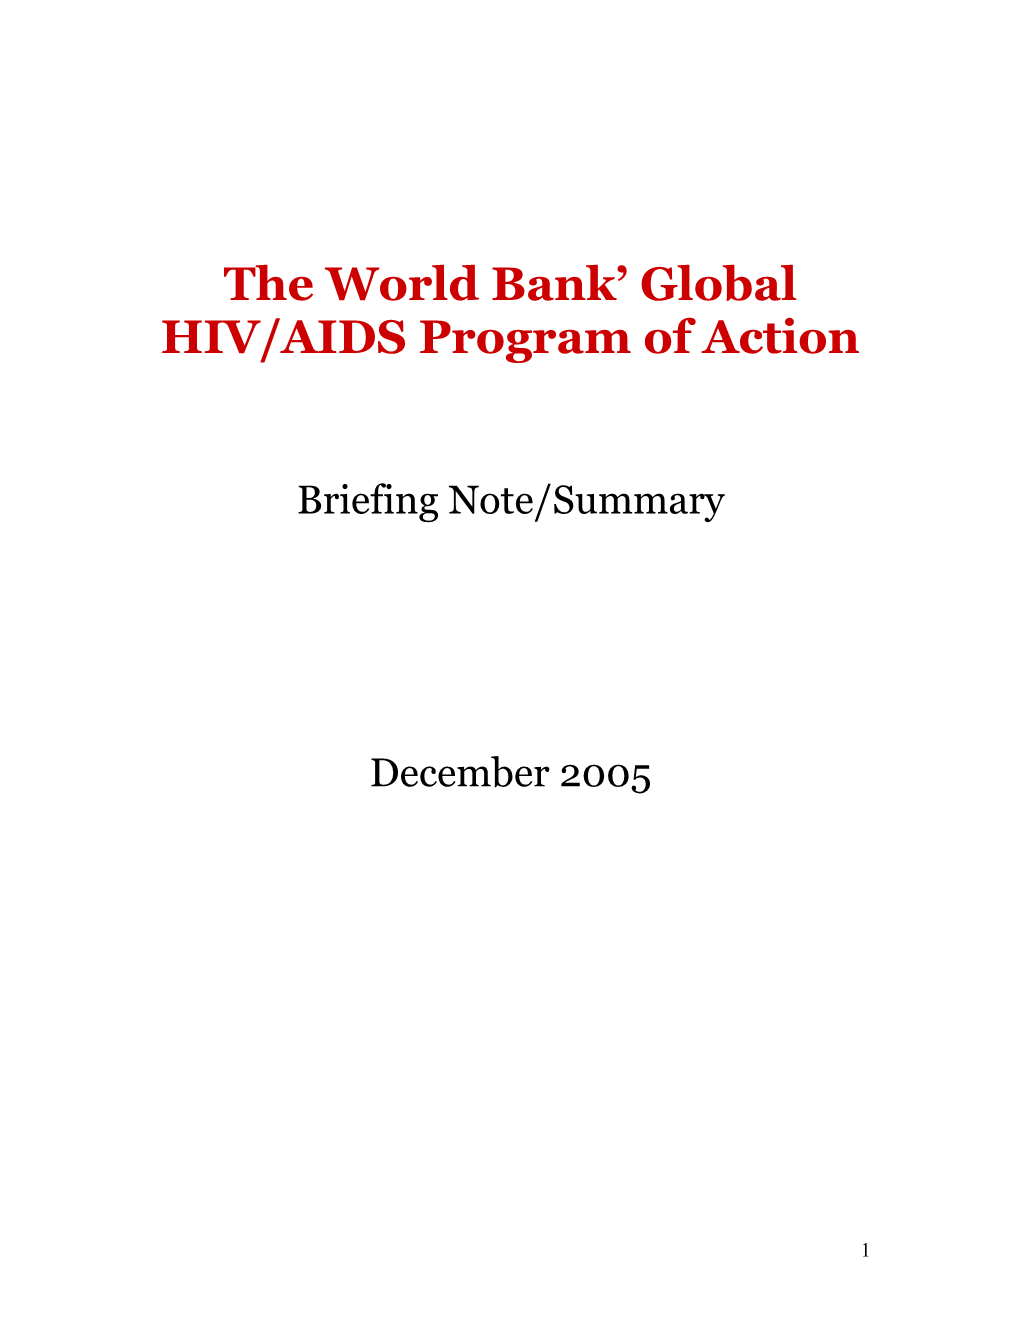 The HIV/AIDS in Africa: Implications for Development